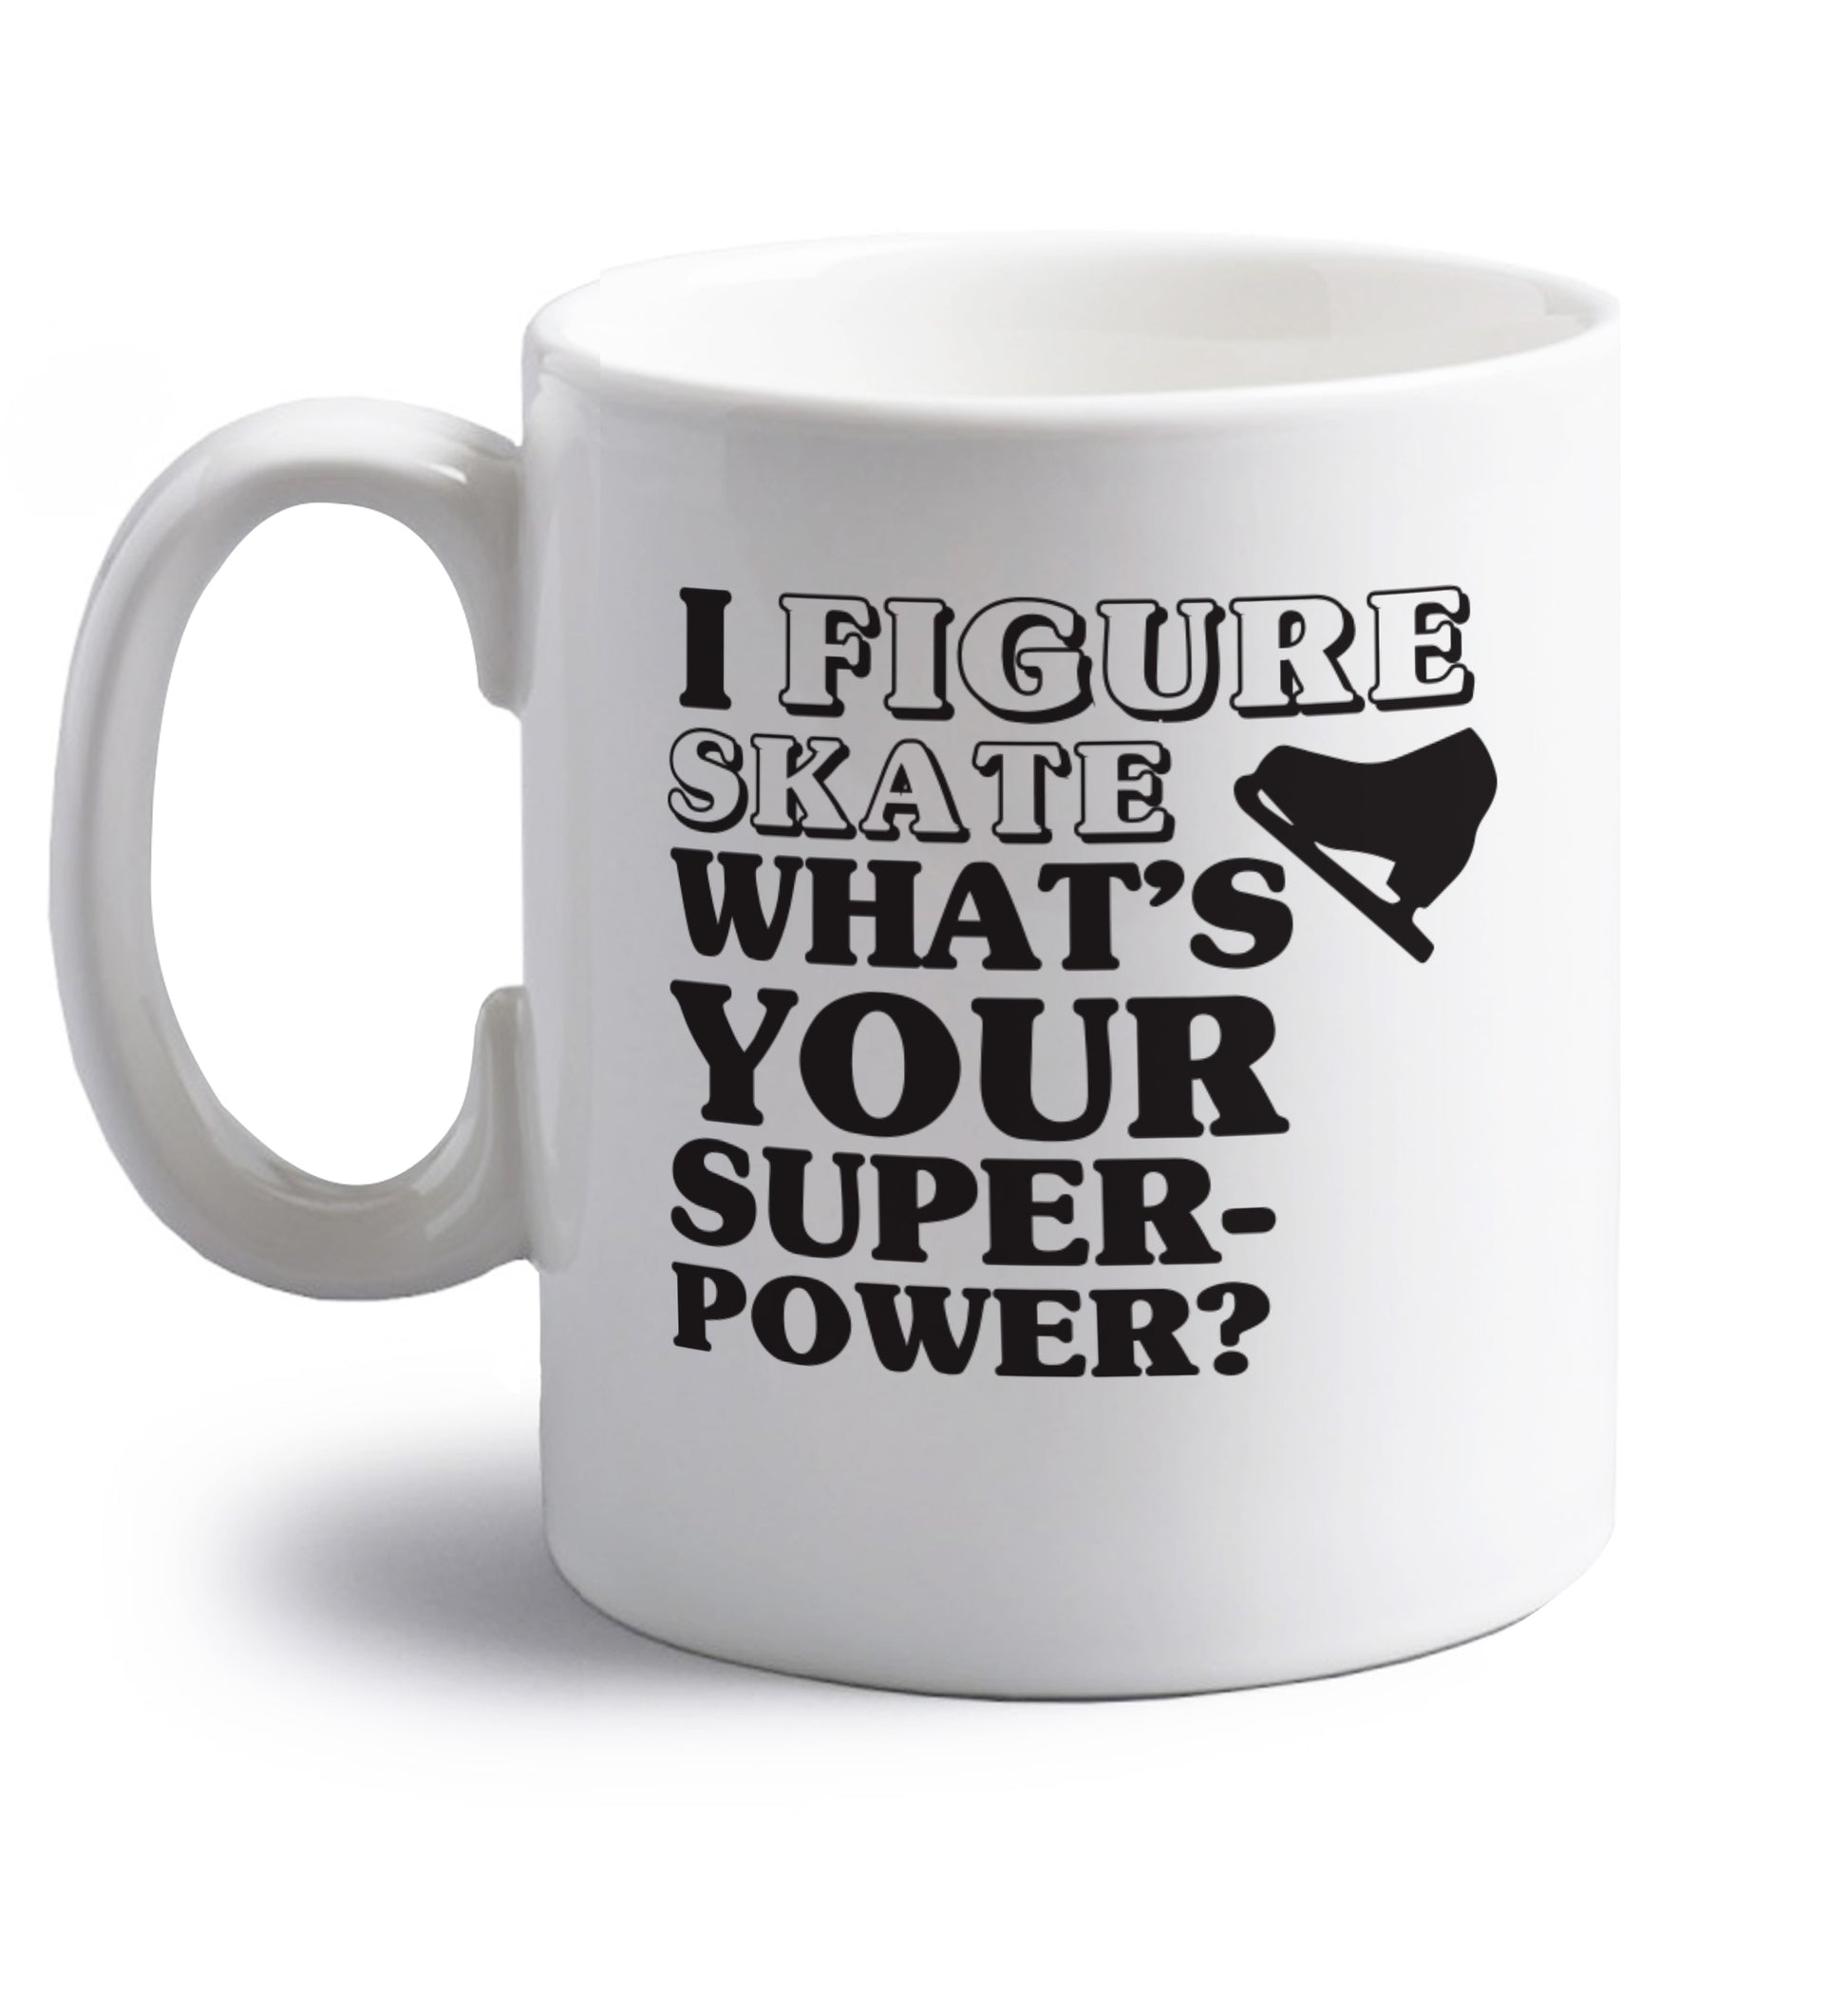 I figure skate what's your superpower? right handed white ceramic mug 